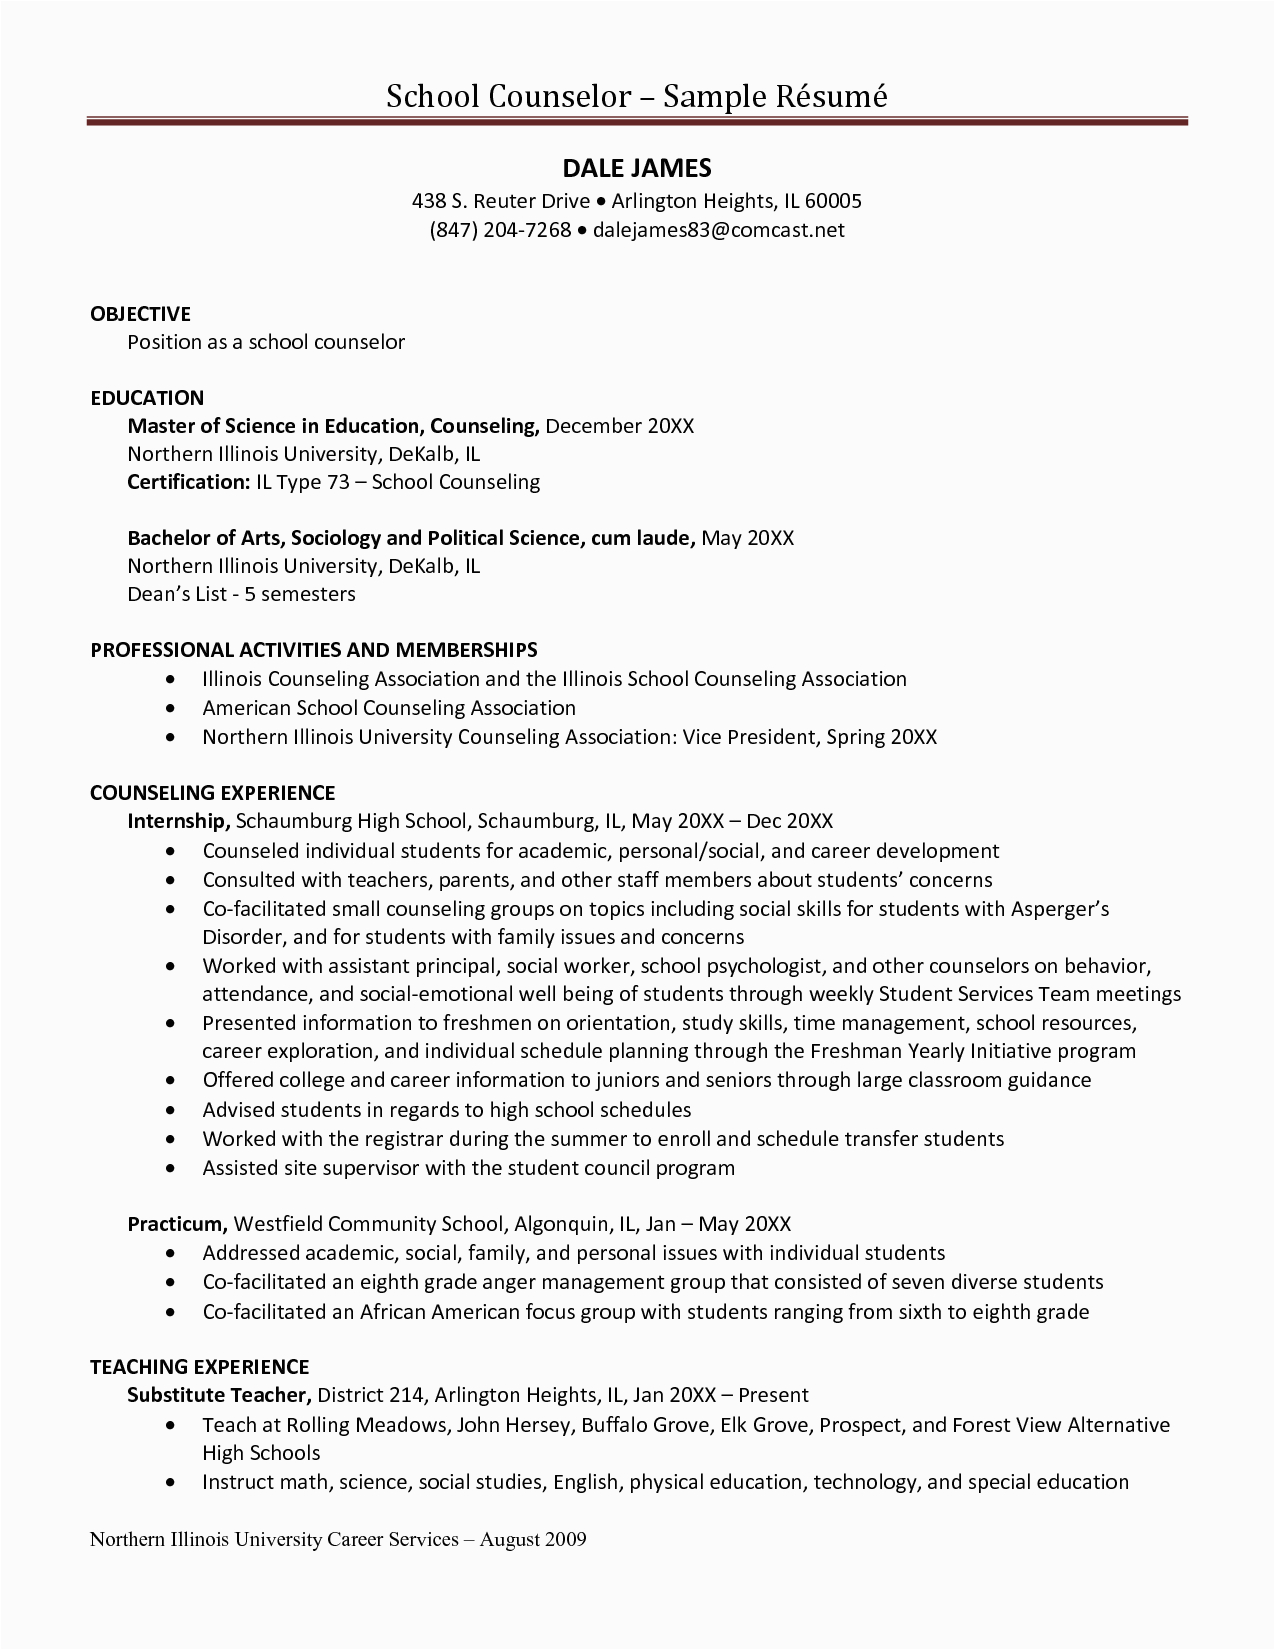 Sample Resume for Guidance Counselor Position Guidance Counselor Resume – Cnbam